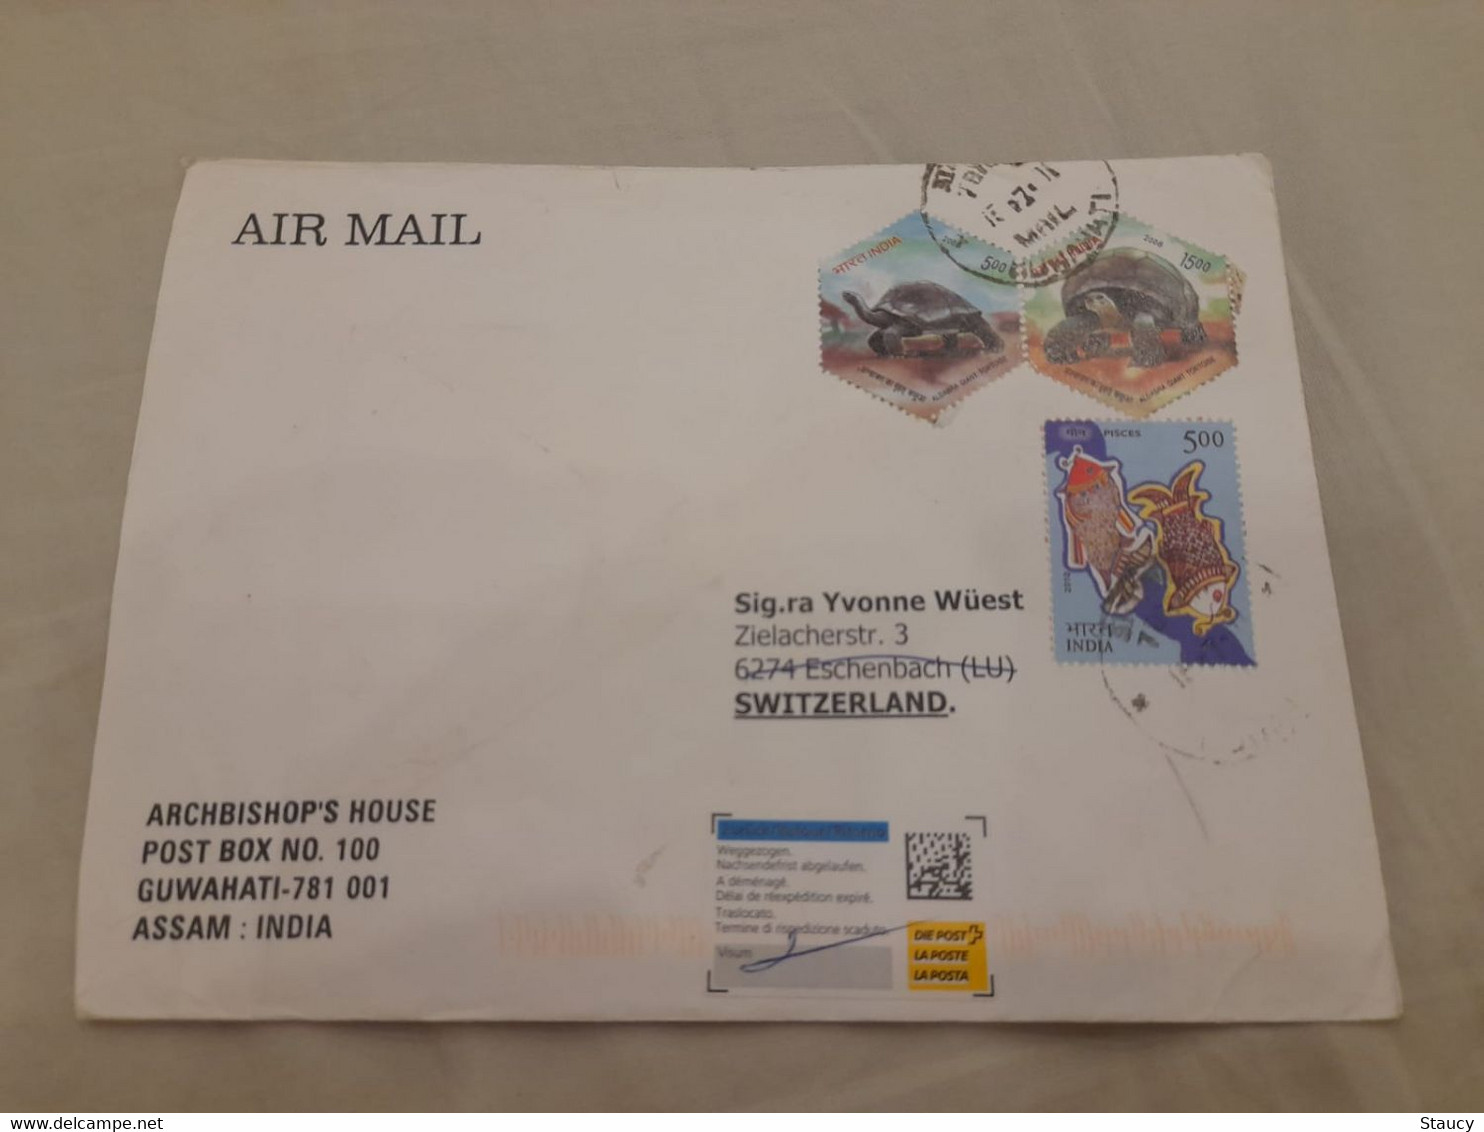 INDIA,2011,RETURN TO SENDER LABEL,AIR MAIL COVER TO SWITZERLAND,3 STAMPS,TORTOISE,ASTROLOGICAL SIGNS, GUWAHATI - Poste Aérienne